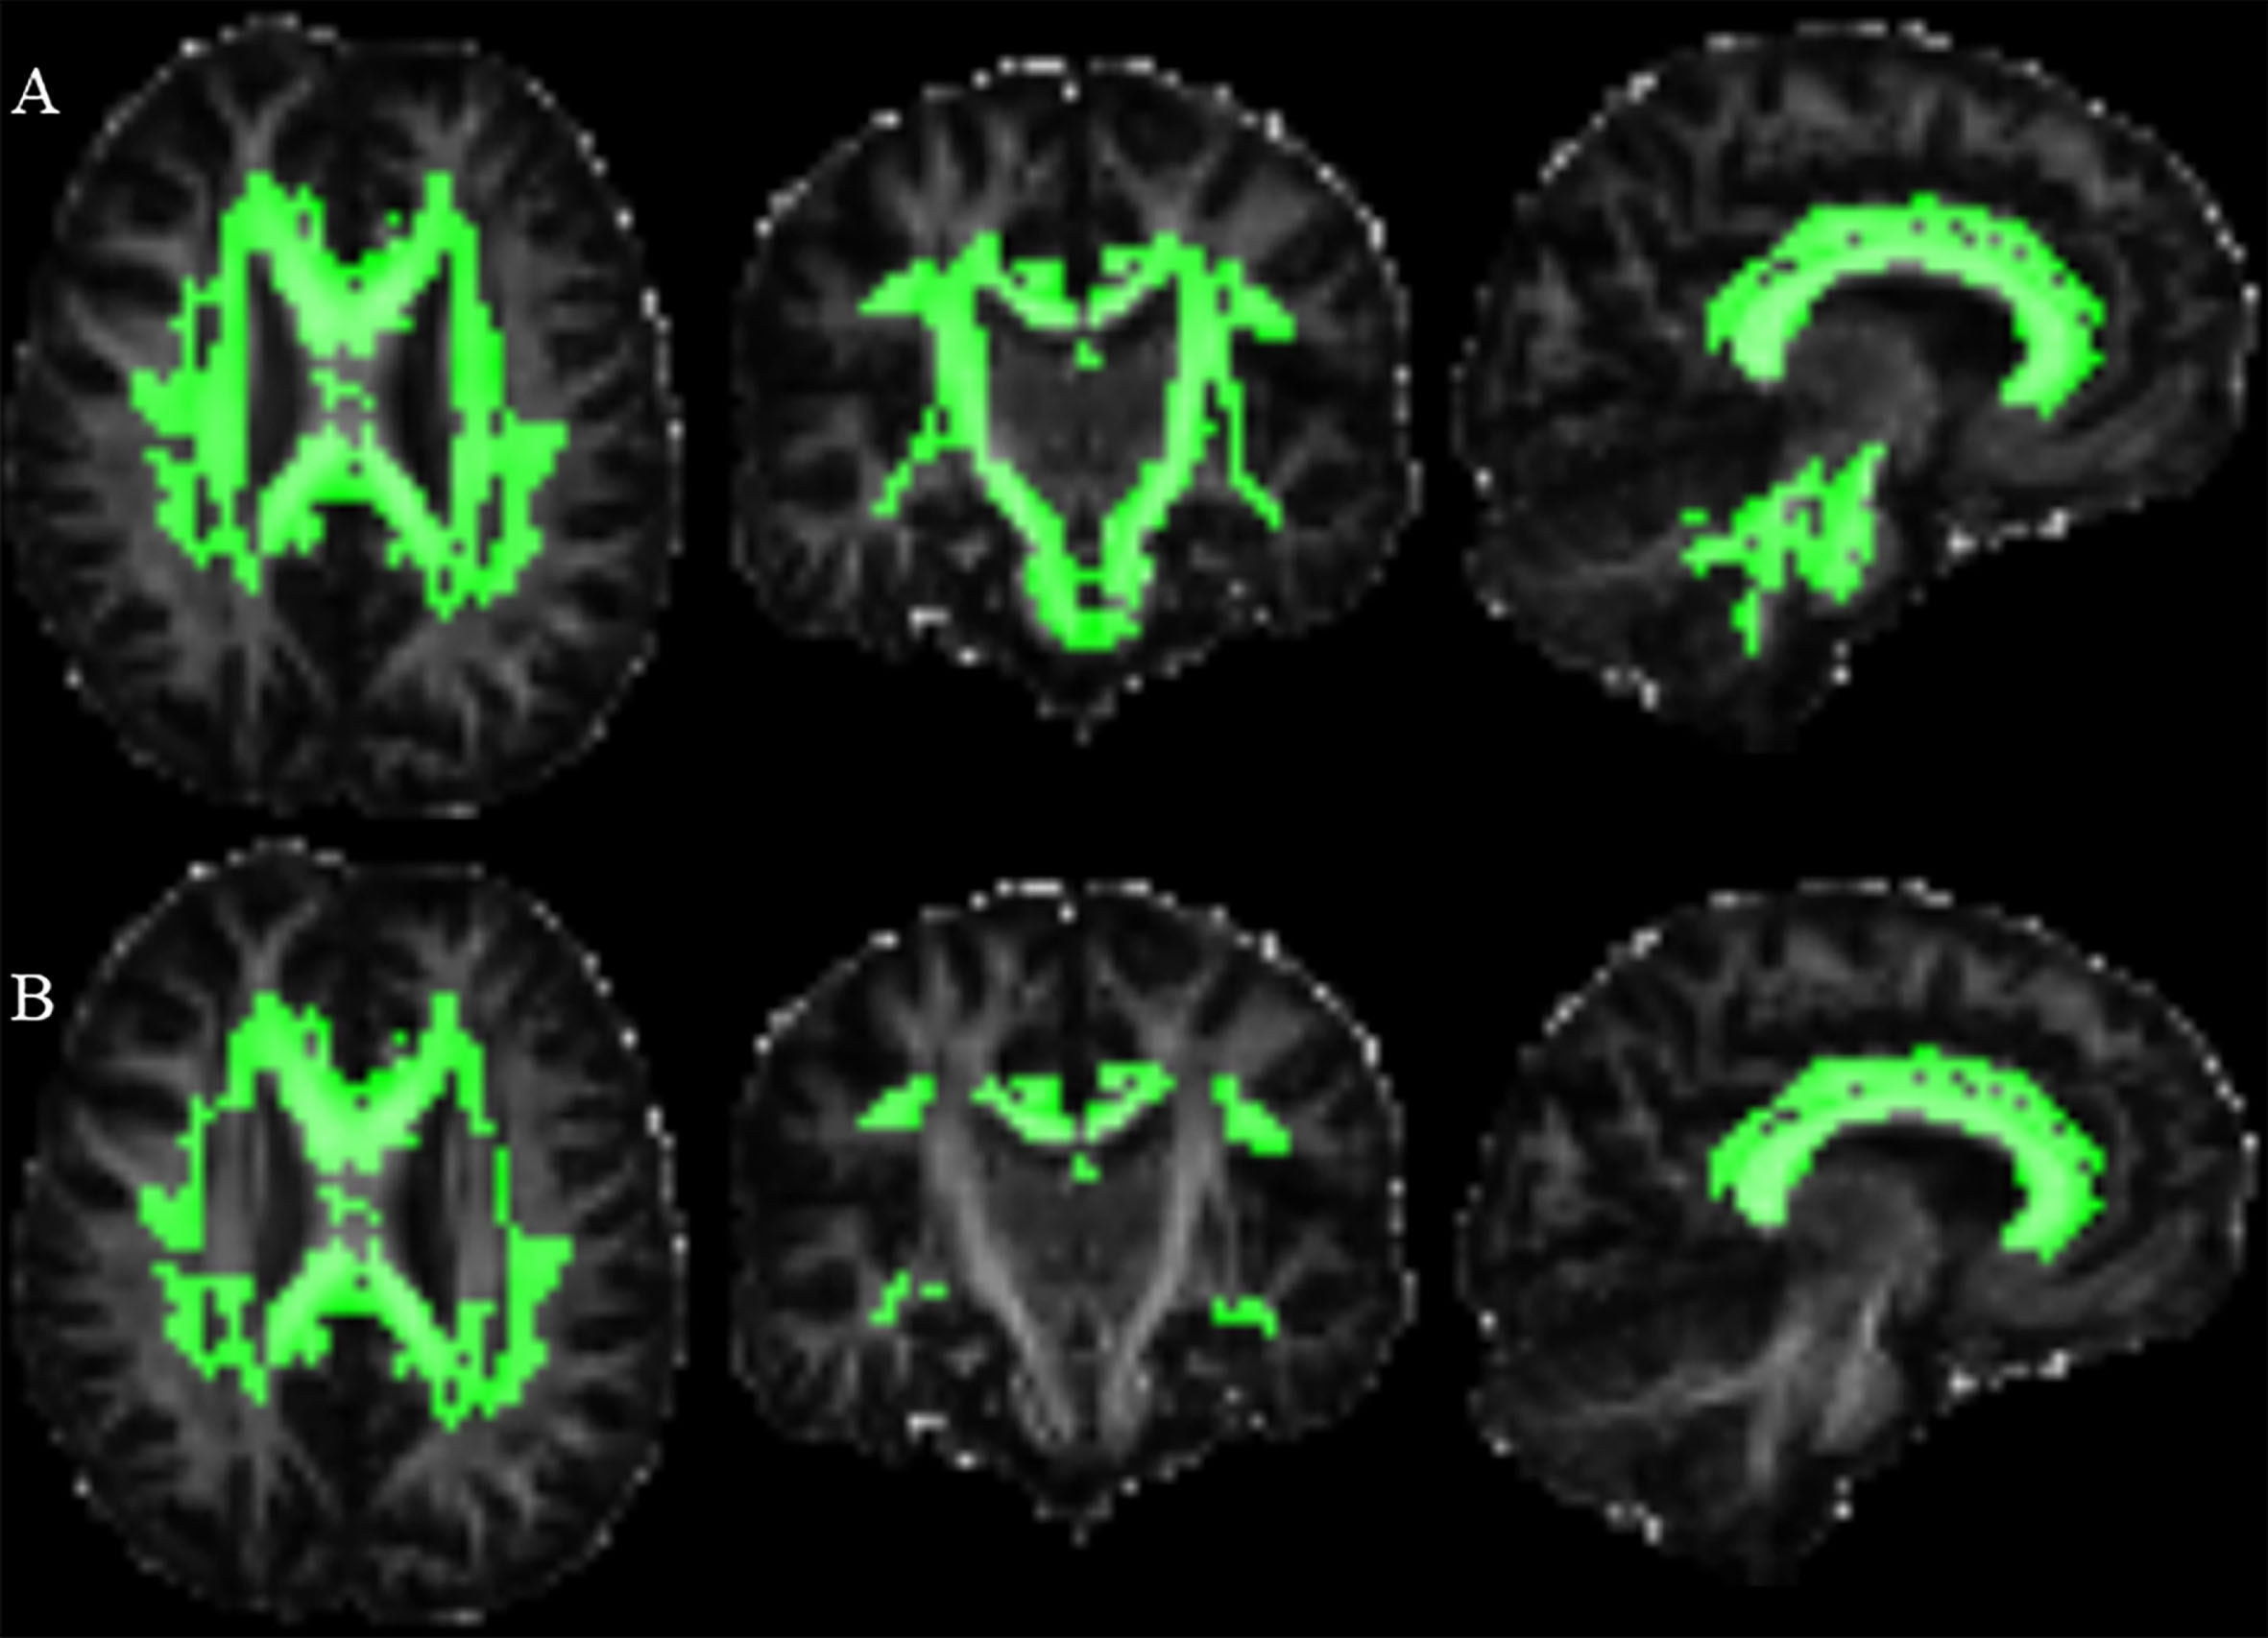 
Brain regions with different MK or FA values among groups. Dispersion space imaging shows brain regions with different diffusion values among three groups (areas highlighted in green). Regions with differences in MK values among groups (A), and regions with differences in FA values among groups (B). The MNI coordination of the picture is X46; Y41; Z36.